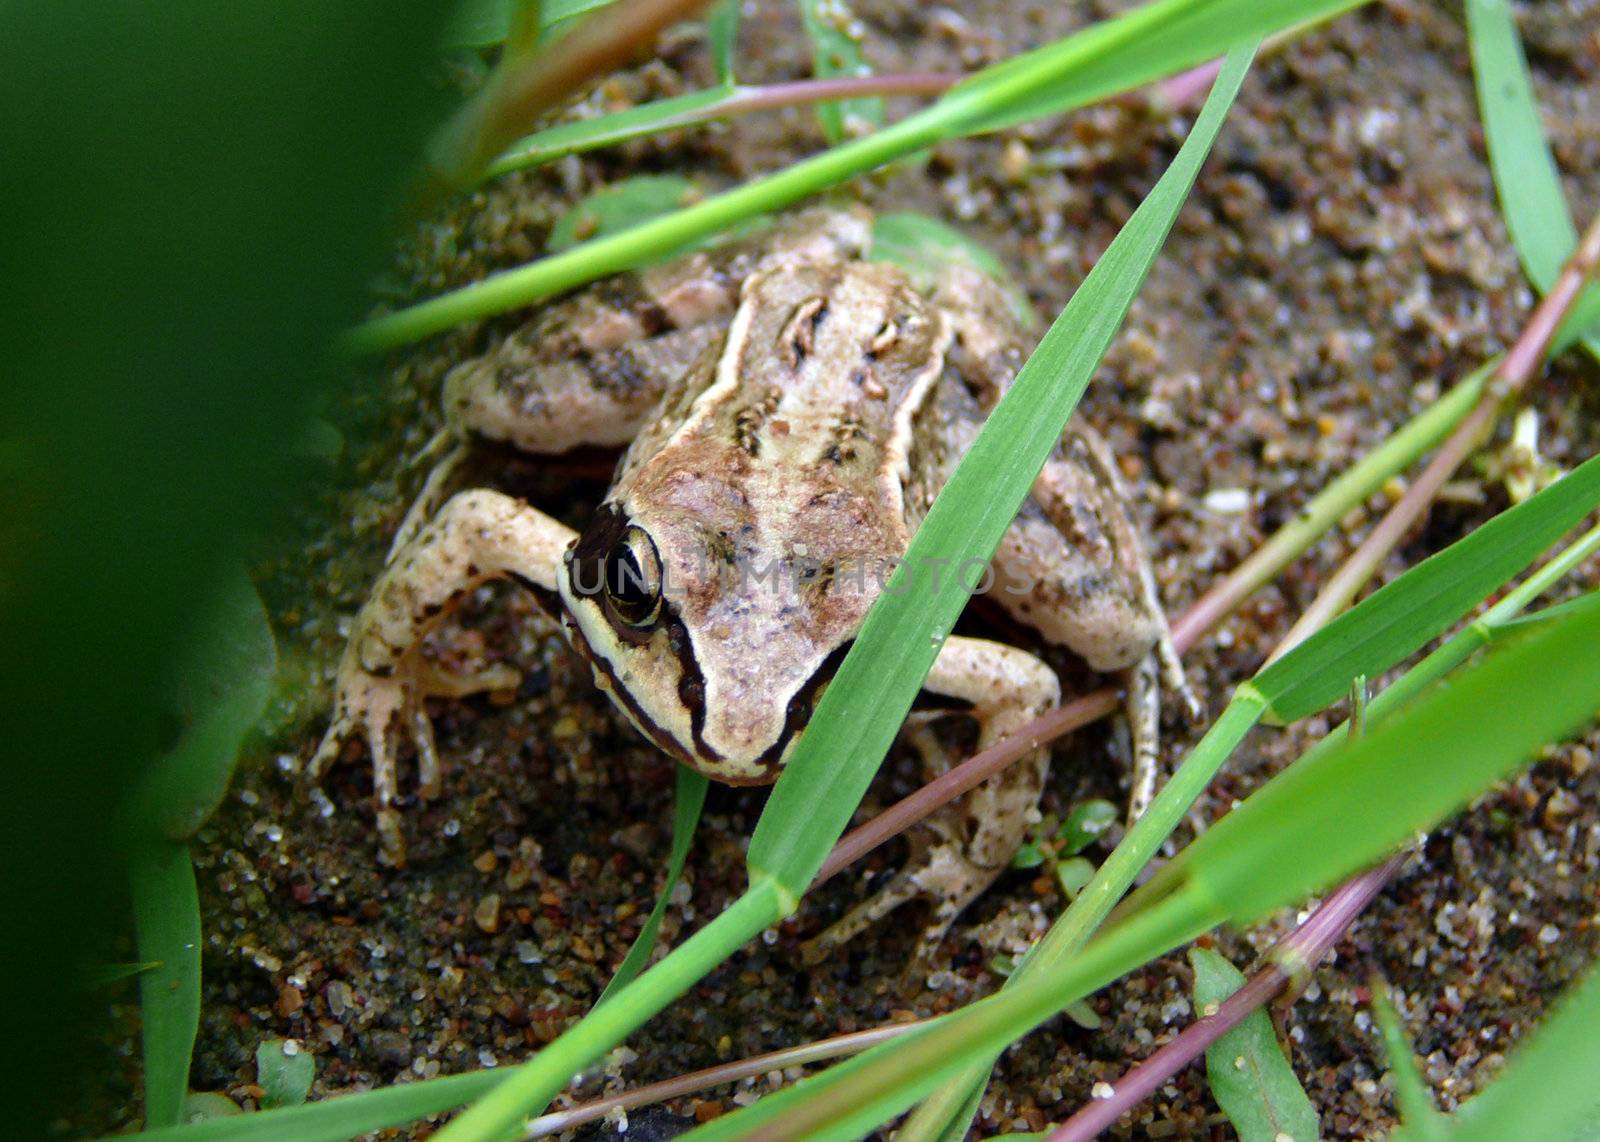 frog in green grass close-up